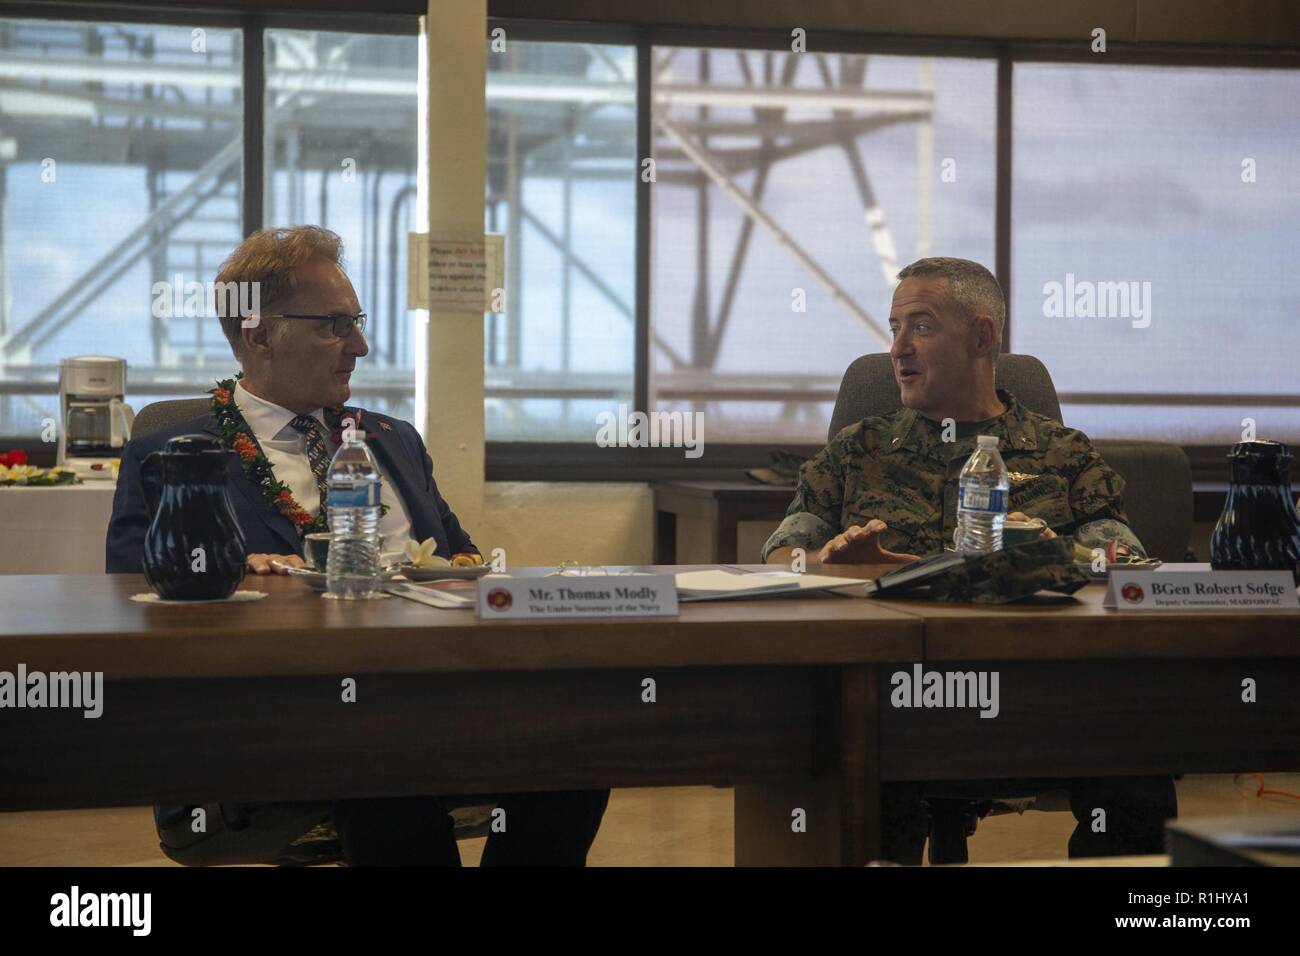 U.S. Marine Corps Brig. Gen. Robert Sofge, deputy commander, U.S. Marine Corps Forces, Pacific, speaks with Under Secretary of the Navy, the Honorable Thomas B. Modly, during a command brief at Kansas Tower, Marine Corps Base Hawaii (MCBH), Sept. 21, 2018. Modly engaged with senior leaders from U.S. Marine Corps Forces, Pacific, Marine Corps Base Hawaii, and Marine Aircraft Group 24 to gain a better understanding of the aviation units and readiness of Marine assets aboard Oahu. Stock Photo